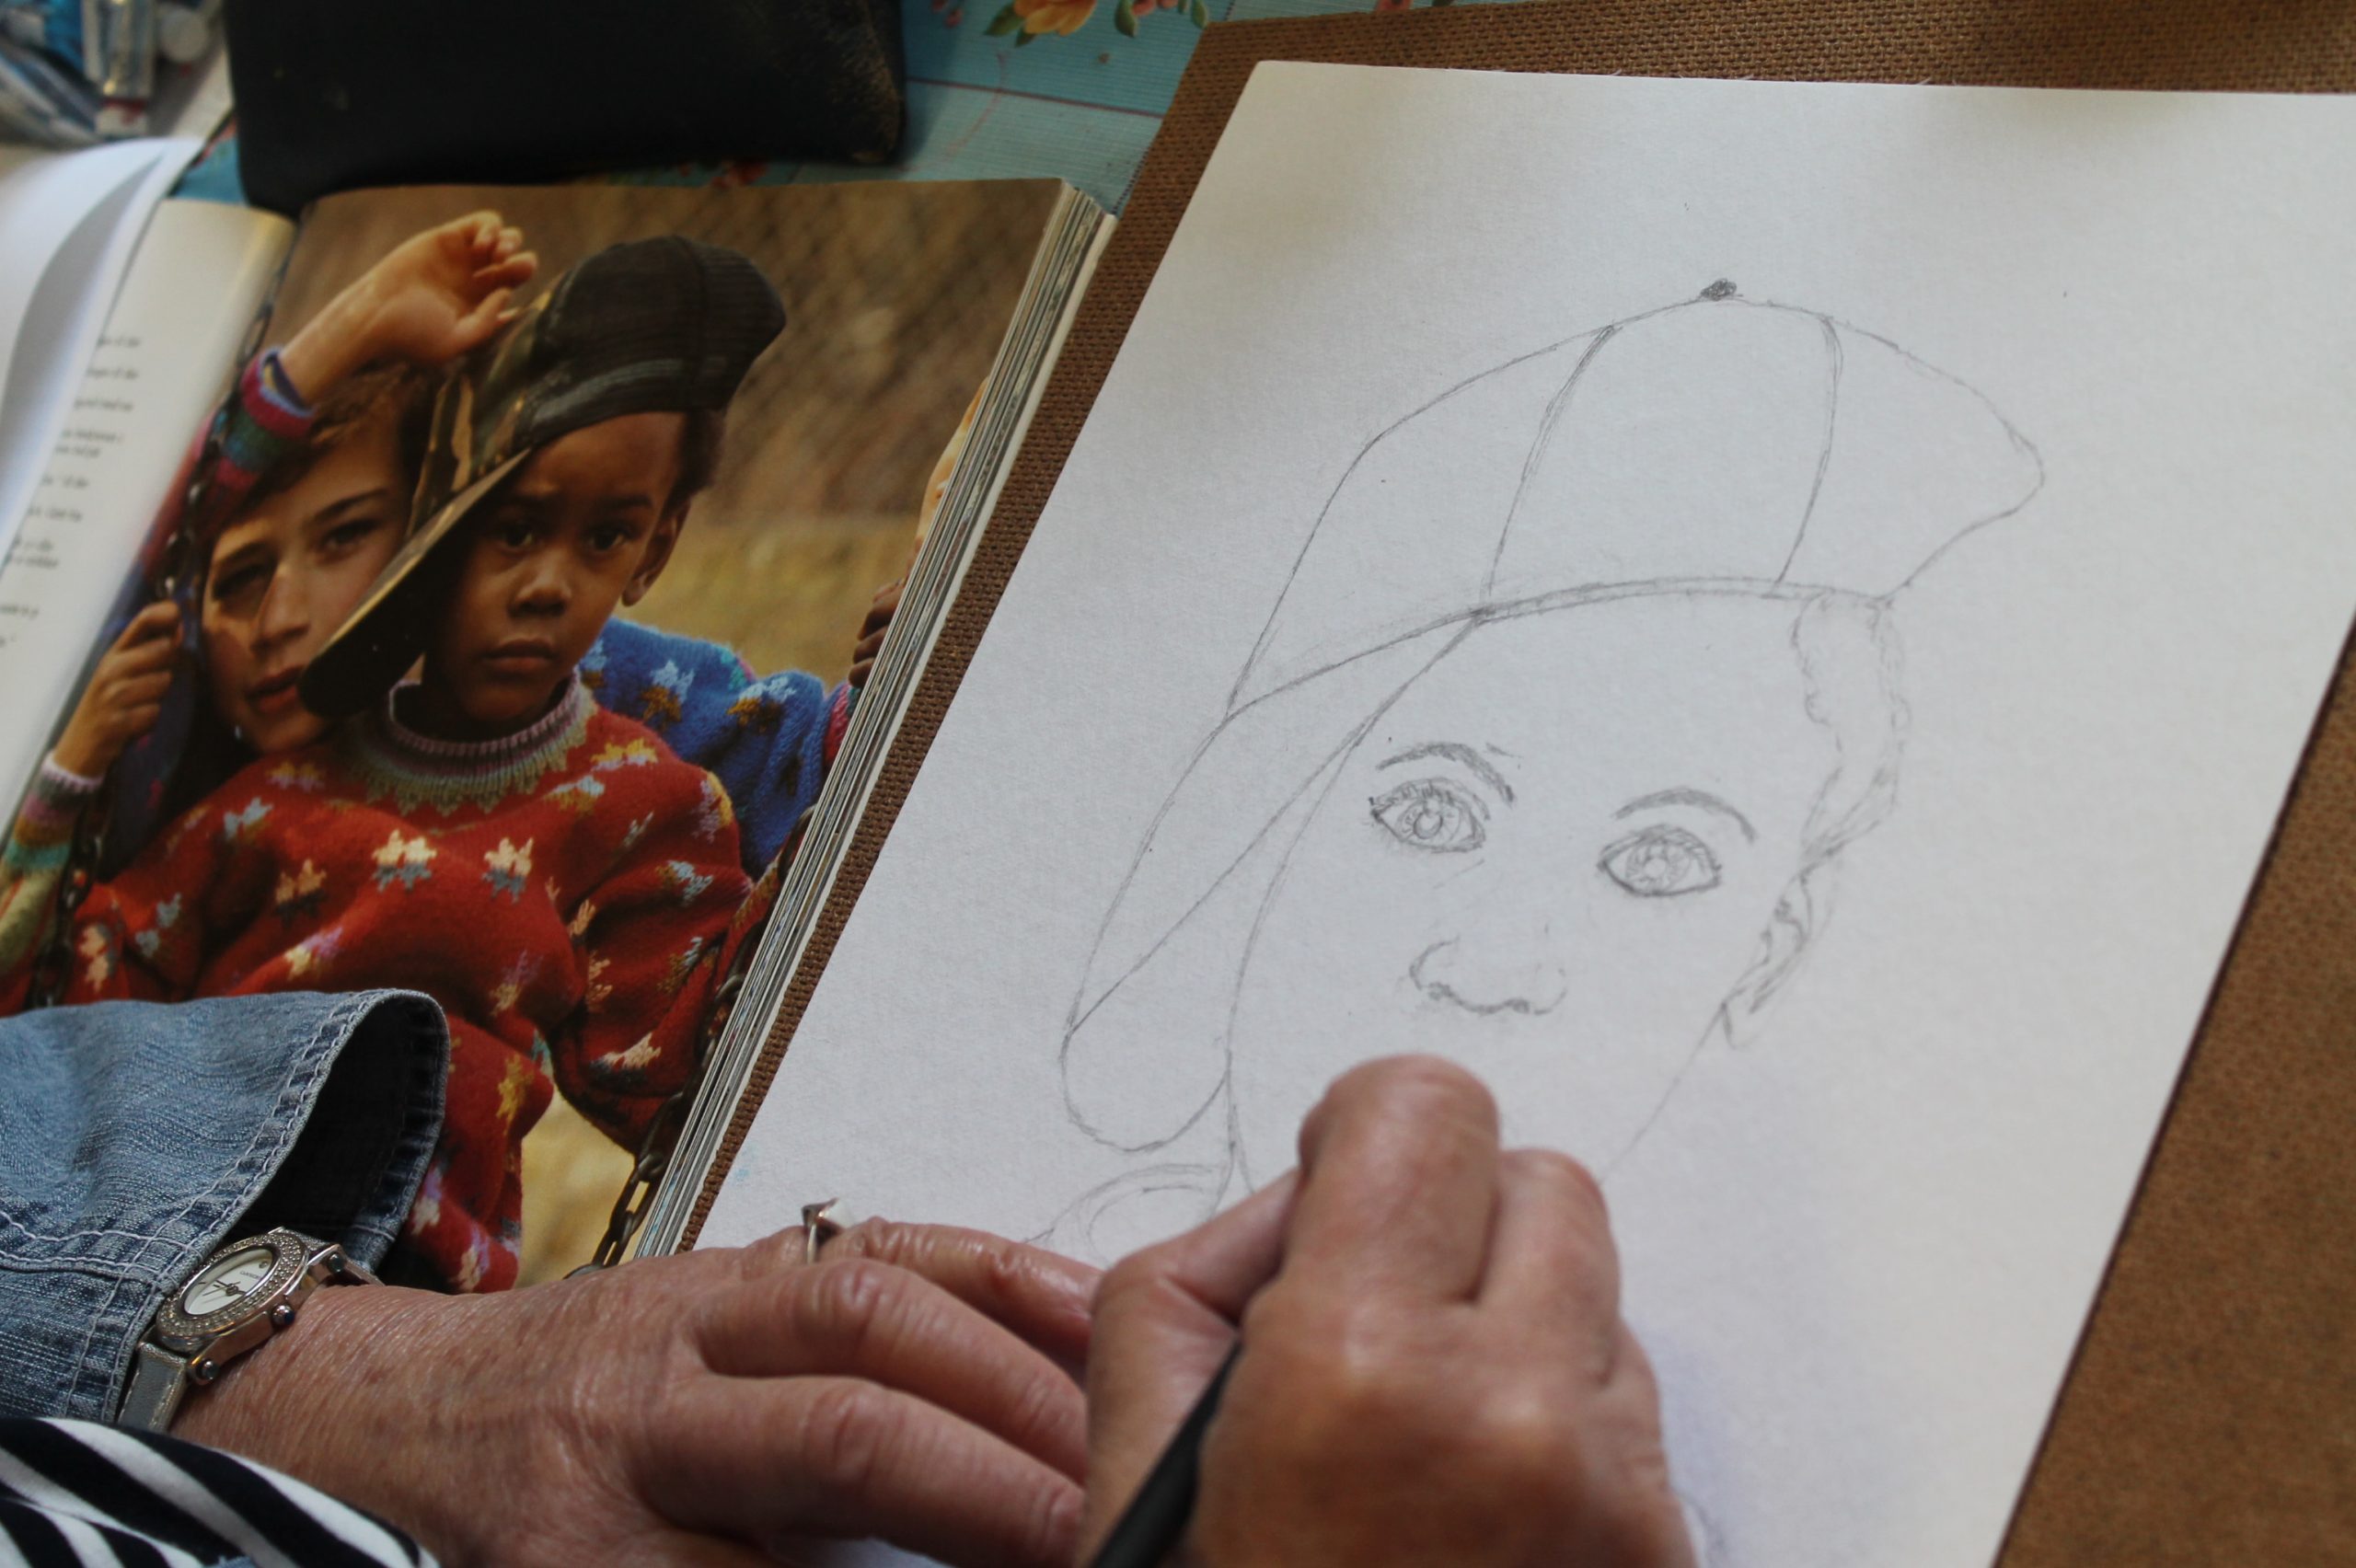 A photograph of someone's hands drawing a picture of a woman's face with a pencil